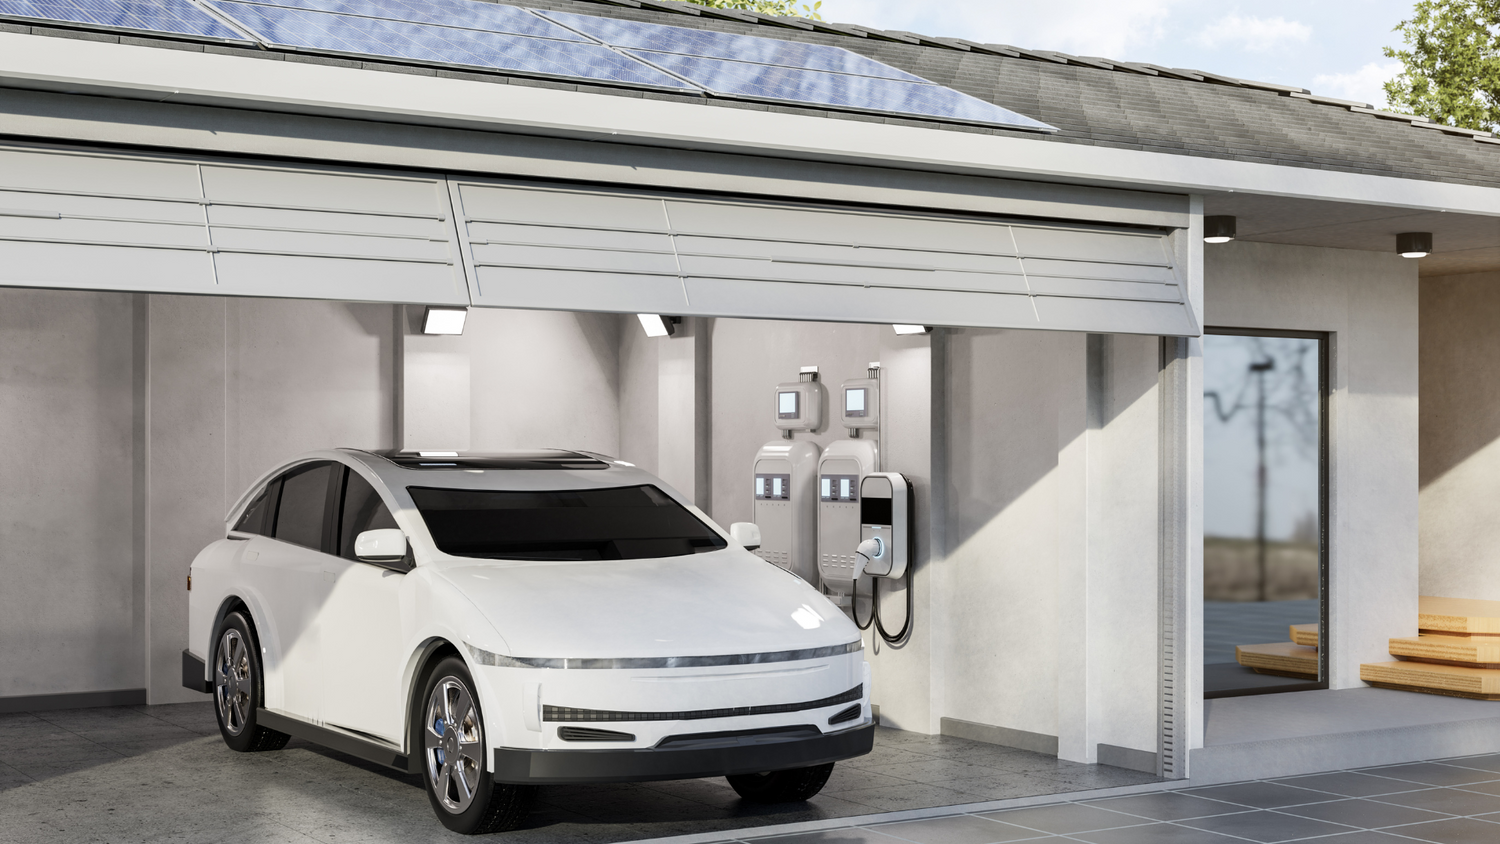 Electrek - Check out the "world's first" DC-to-DC solar-powered EV charger